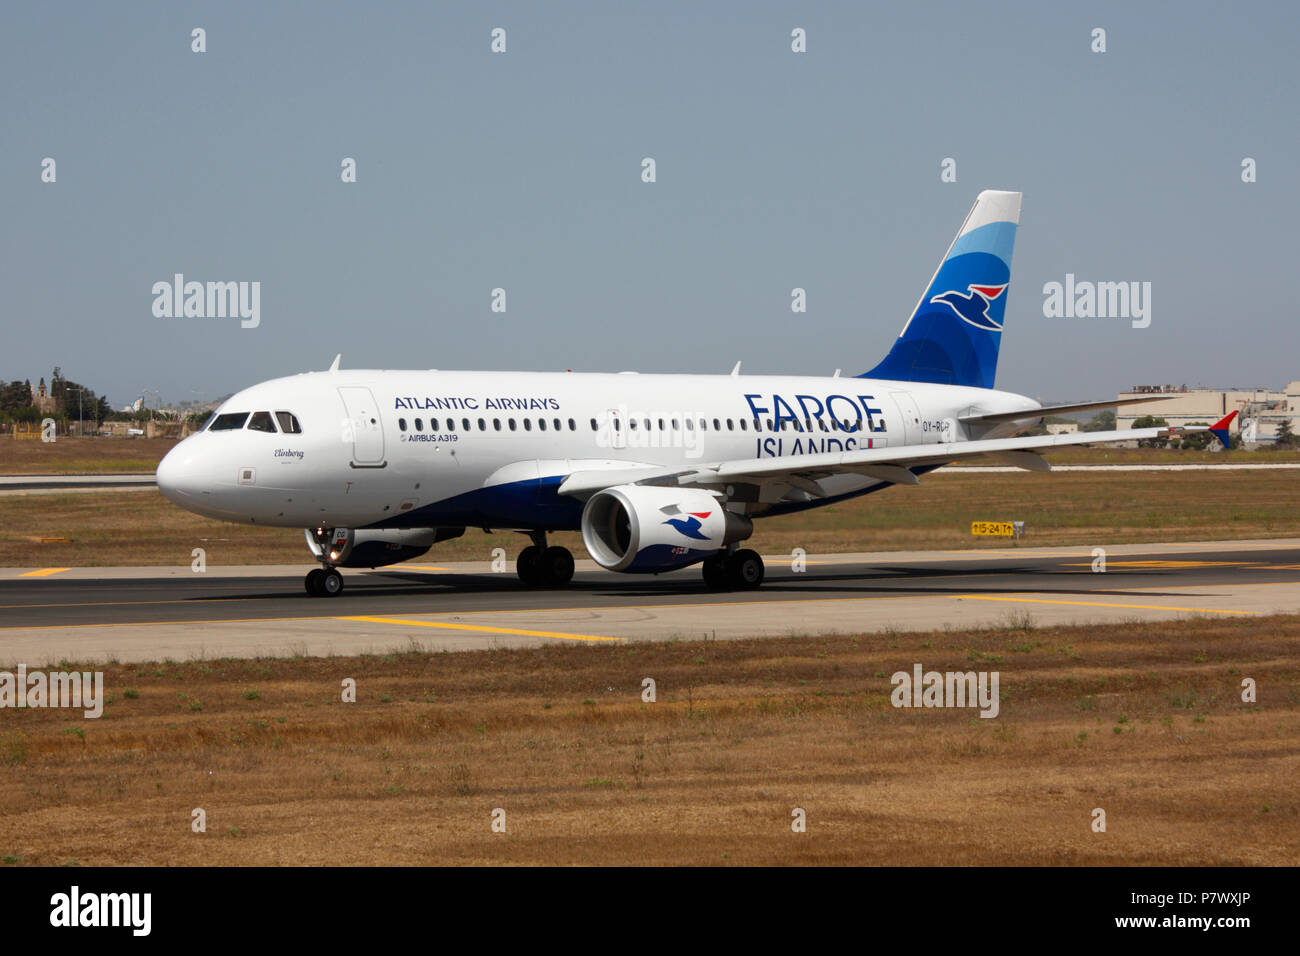 Airbus A319 commercial passenger jet plane belonging to Atlantic Airways, the airline of the Faroe Islands, taxiing for departure Stock Photo